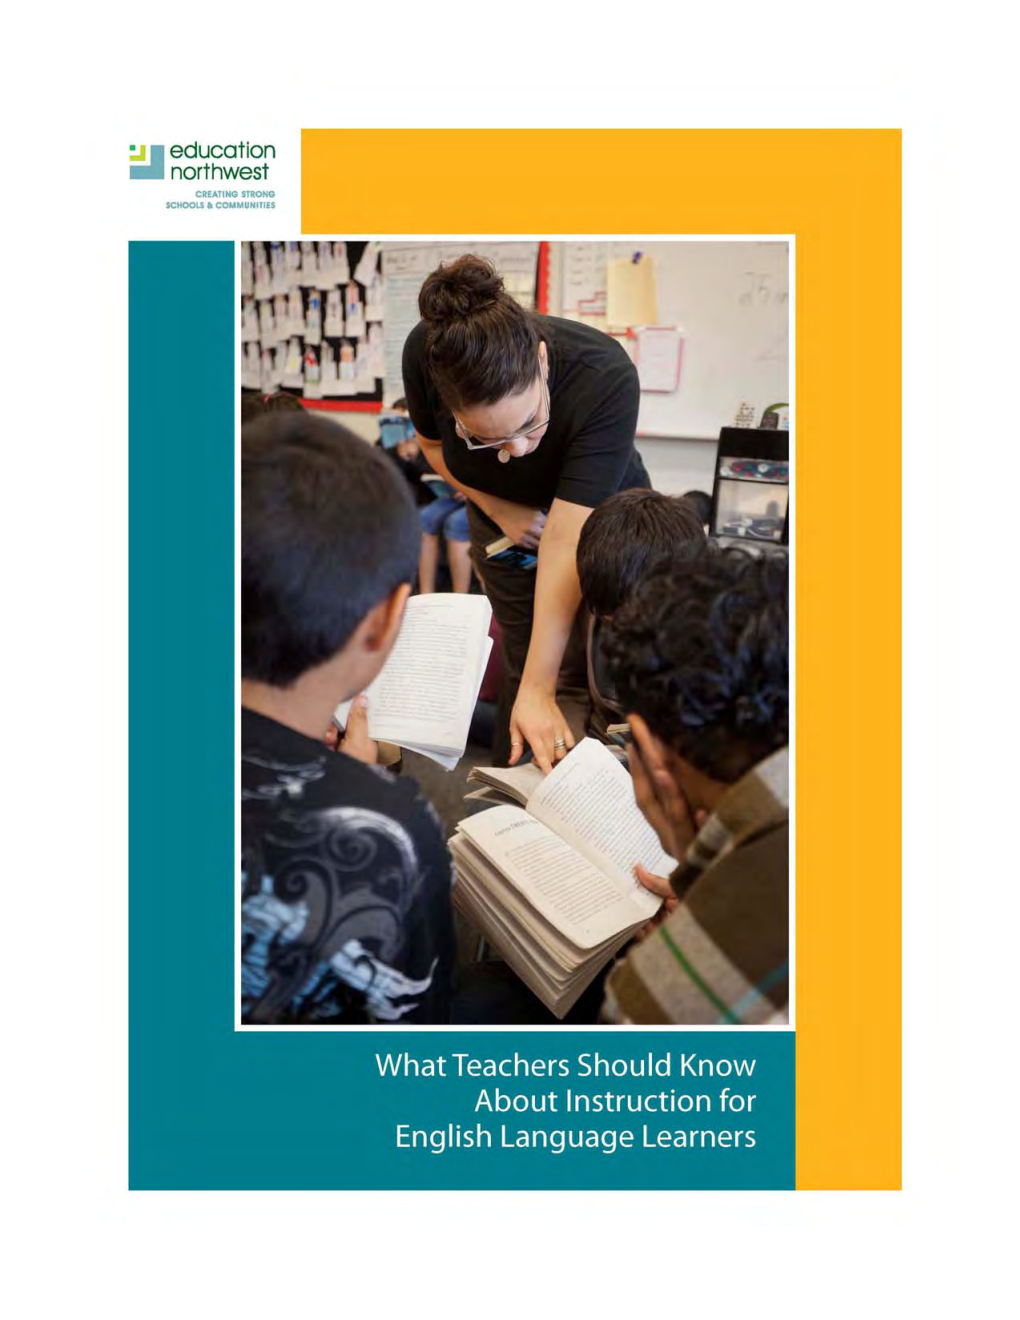 What Teachers Should Know About Instruction for Ells